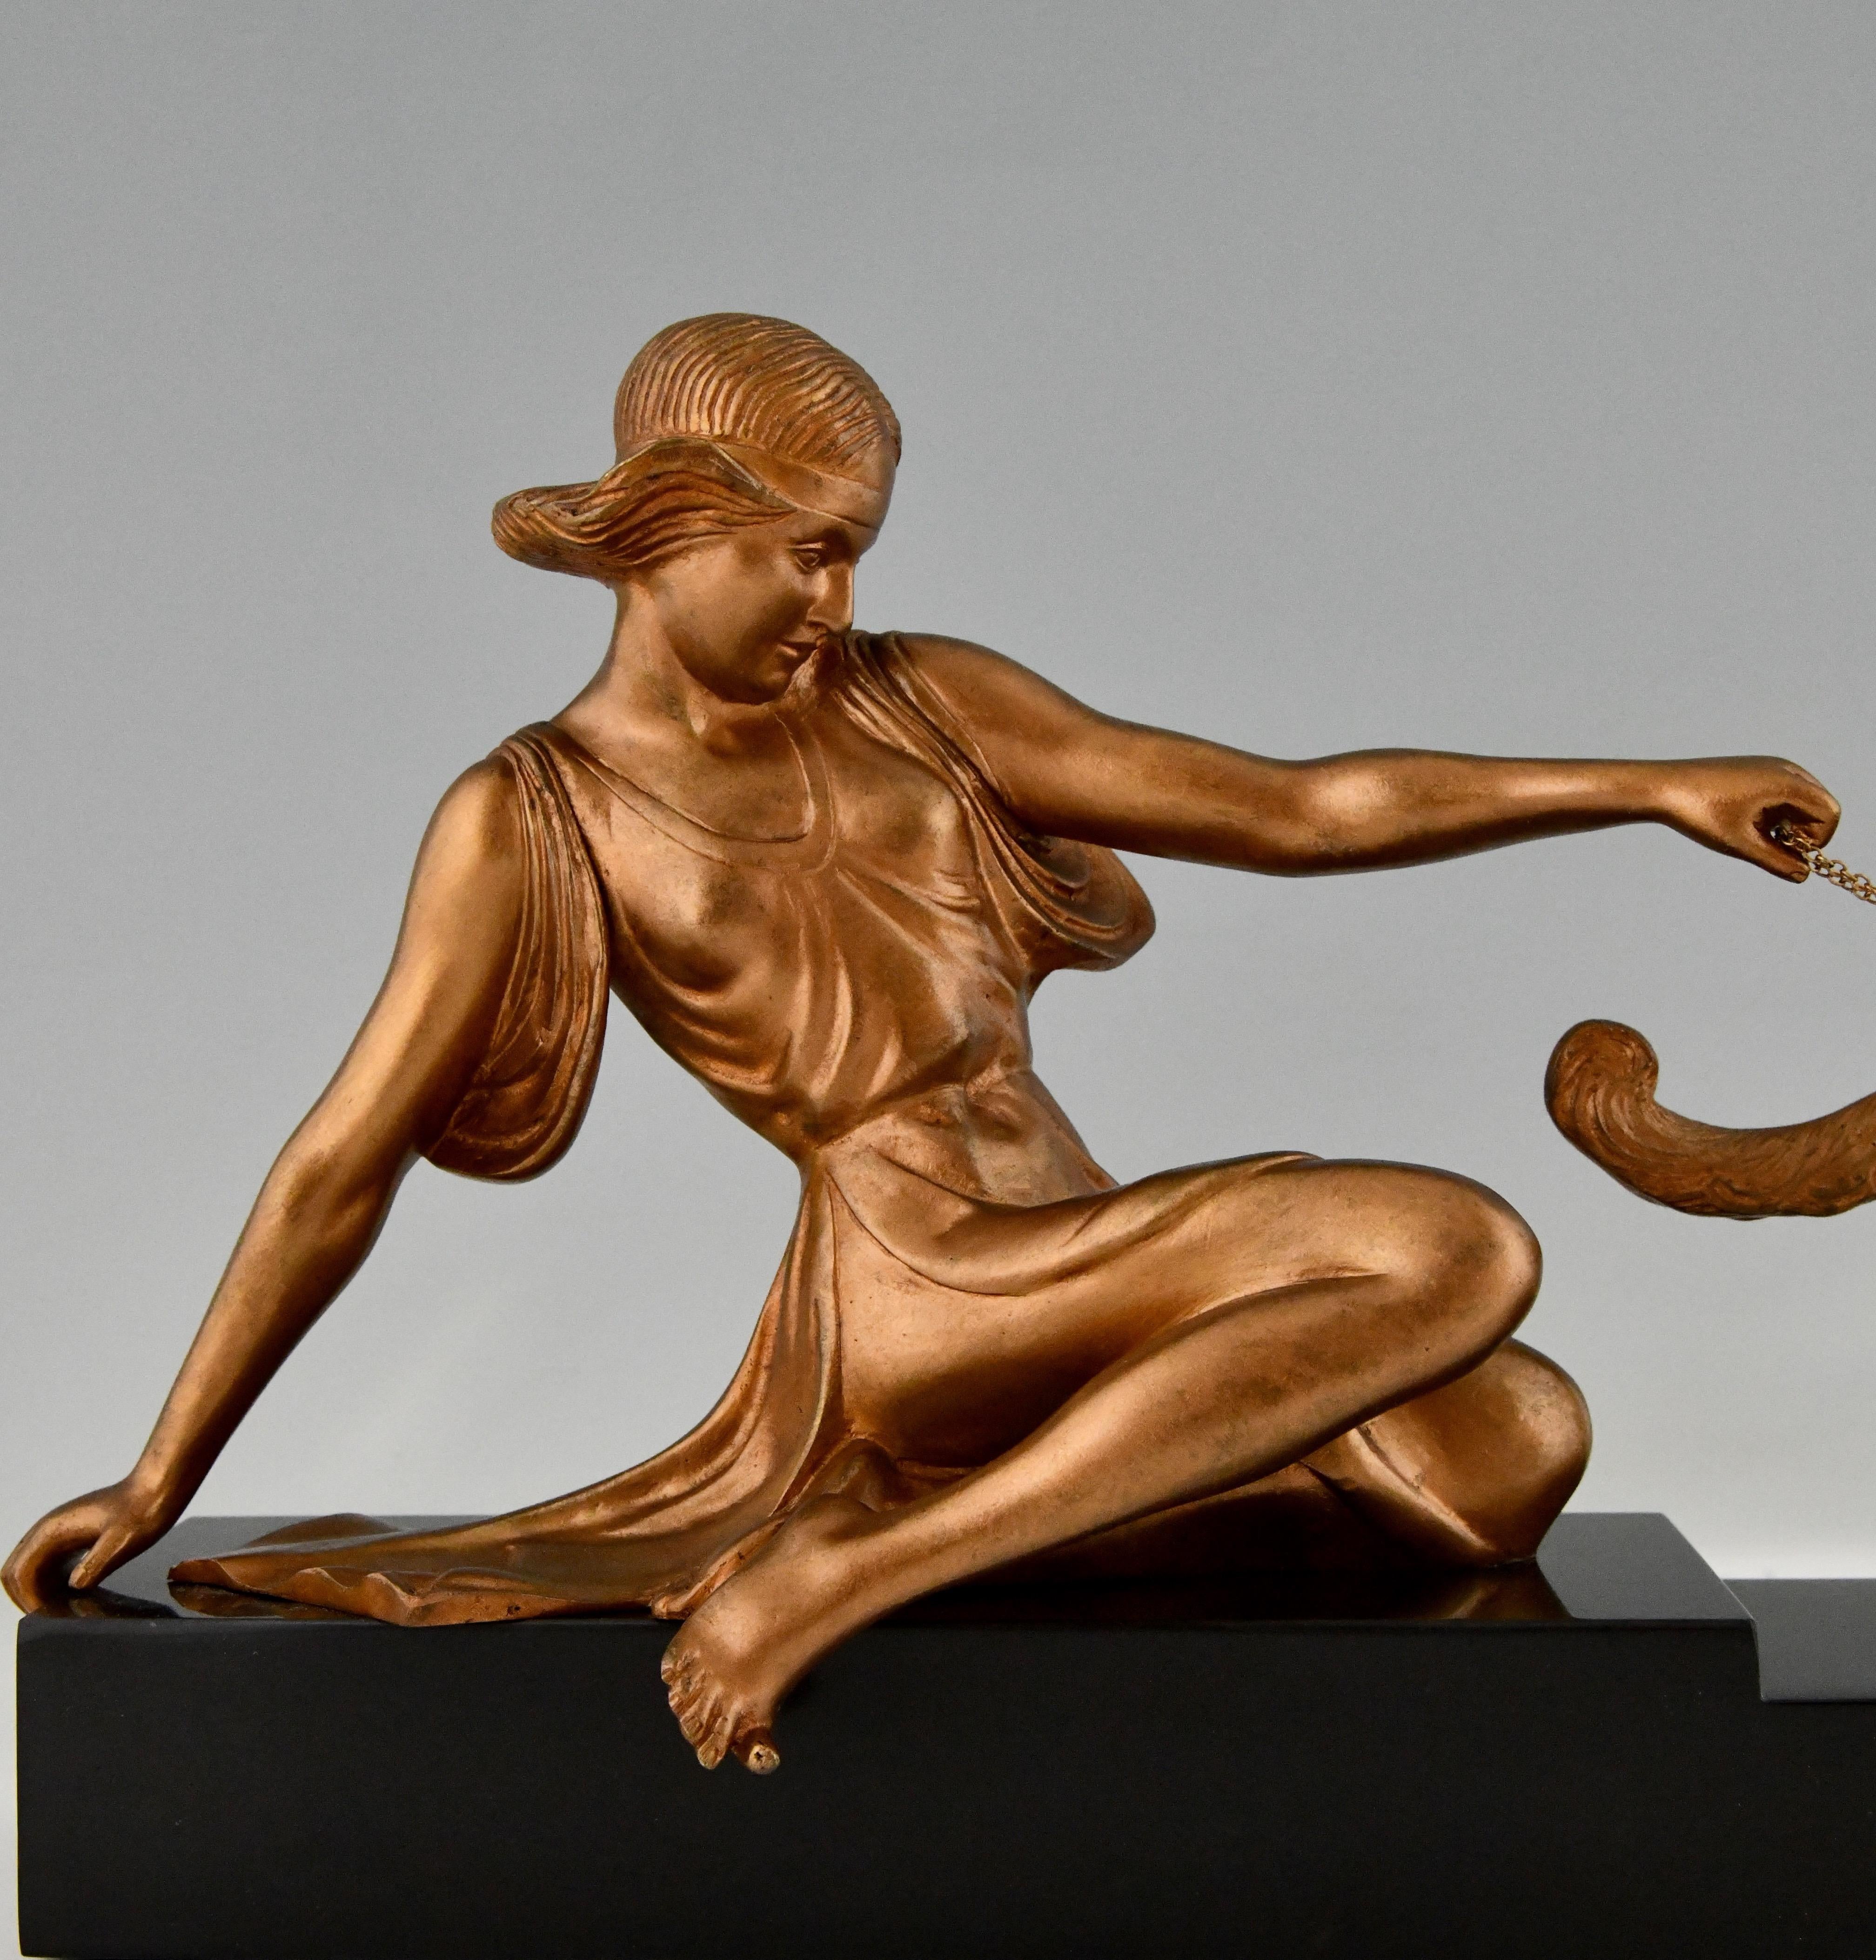 Art Deco Bronze Sculpture Lady with Greyhound Dog by Armand Godard 1930 For Sale 2